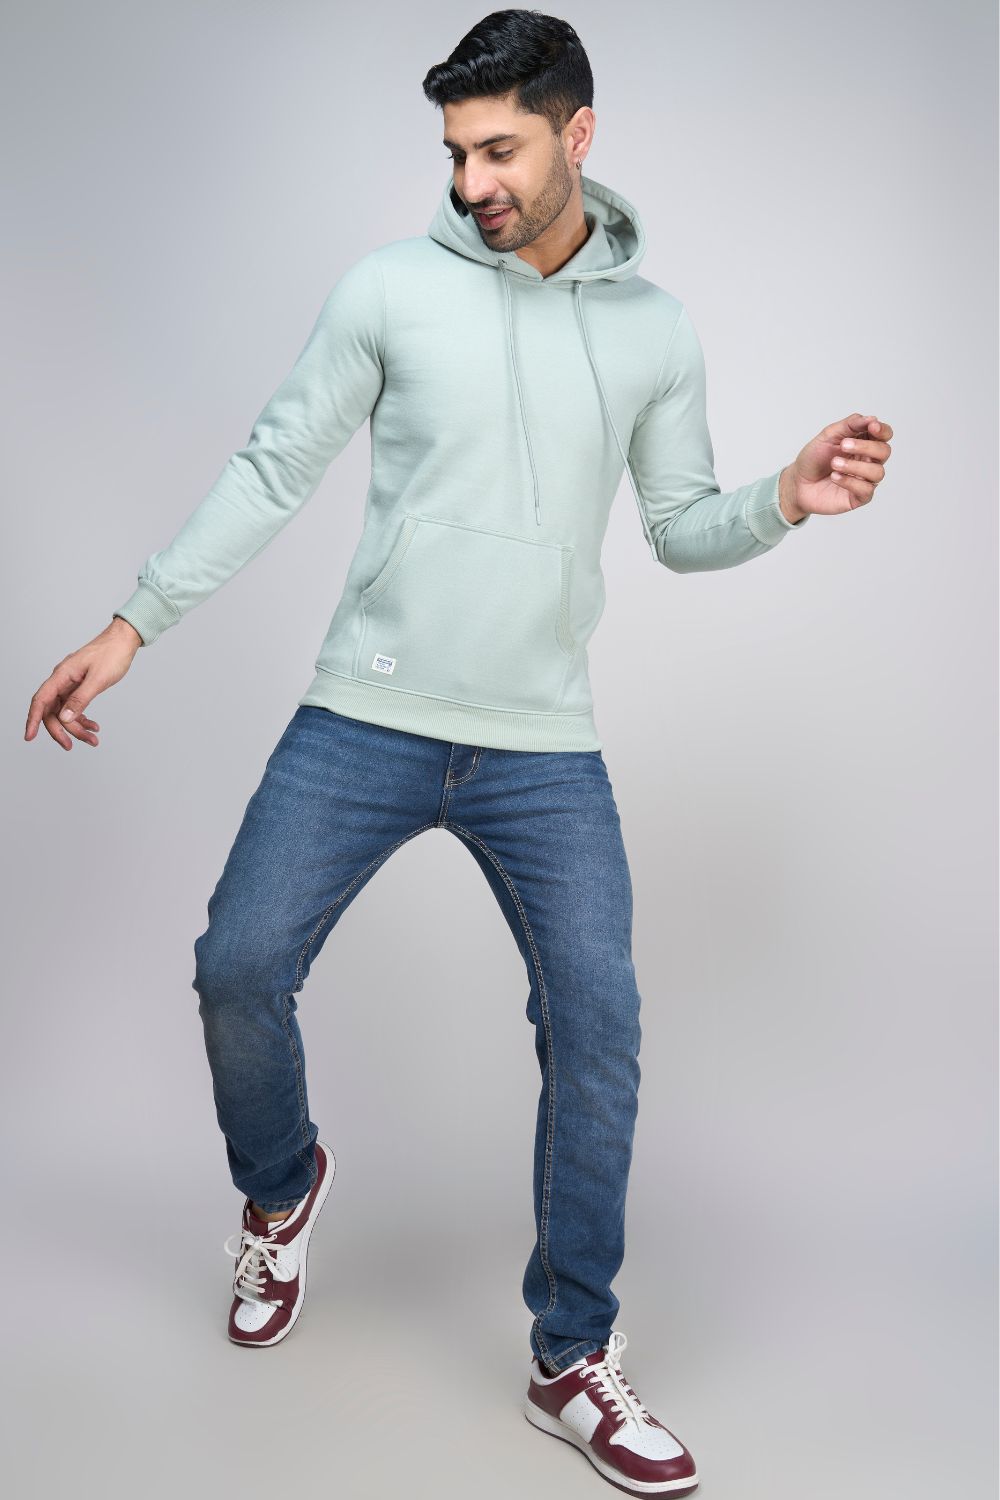 Sea Green colored, hoodie for men with full sleeves and relaxed fit, Full view.